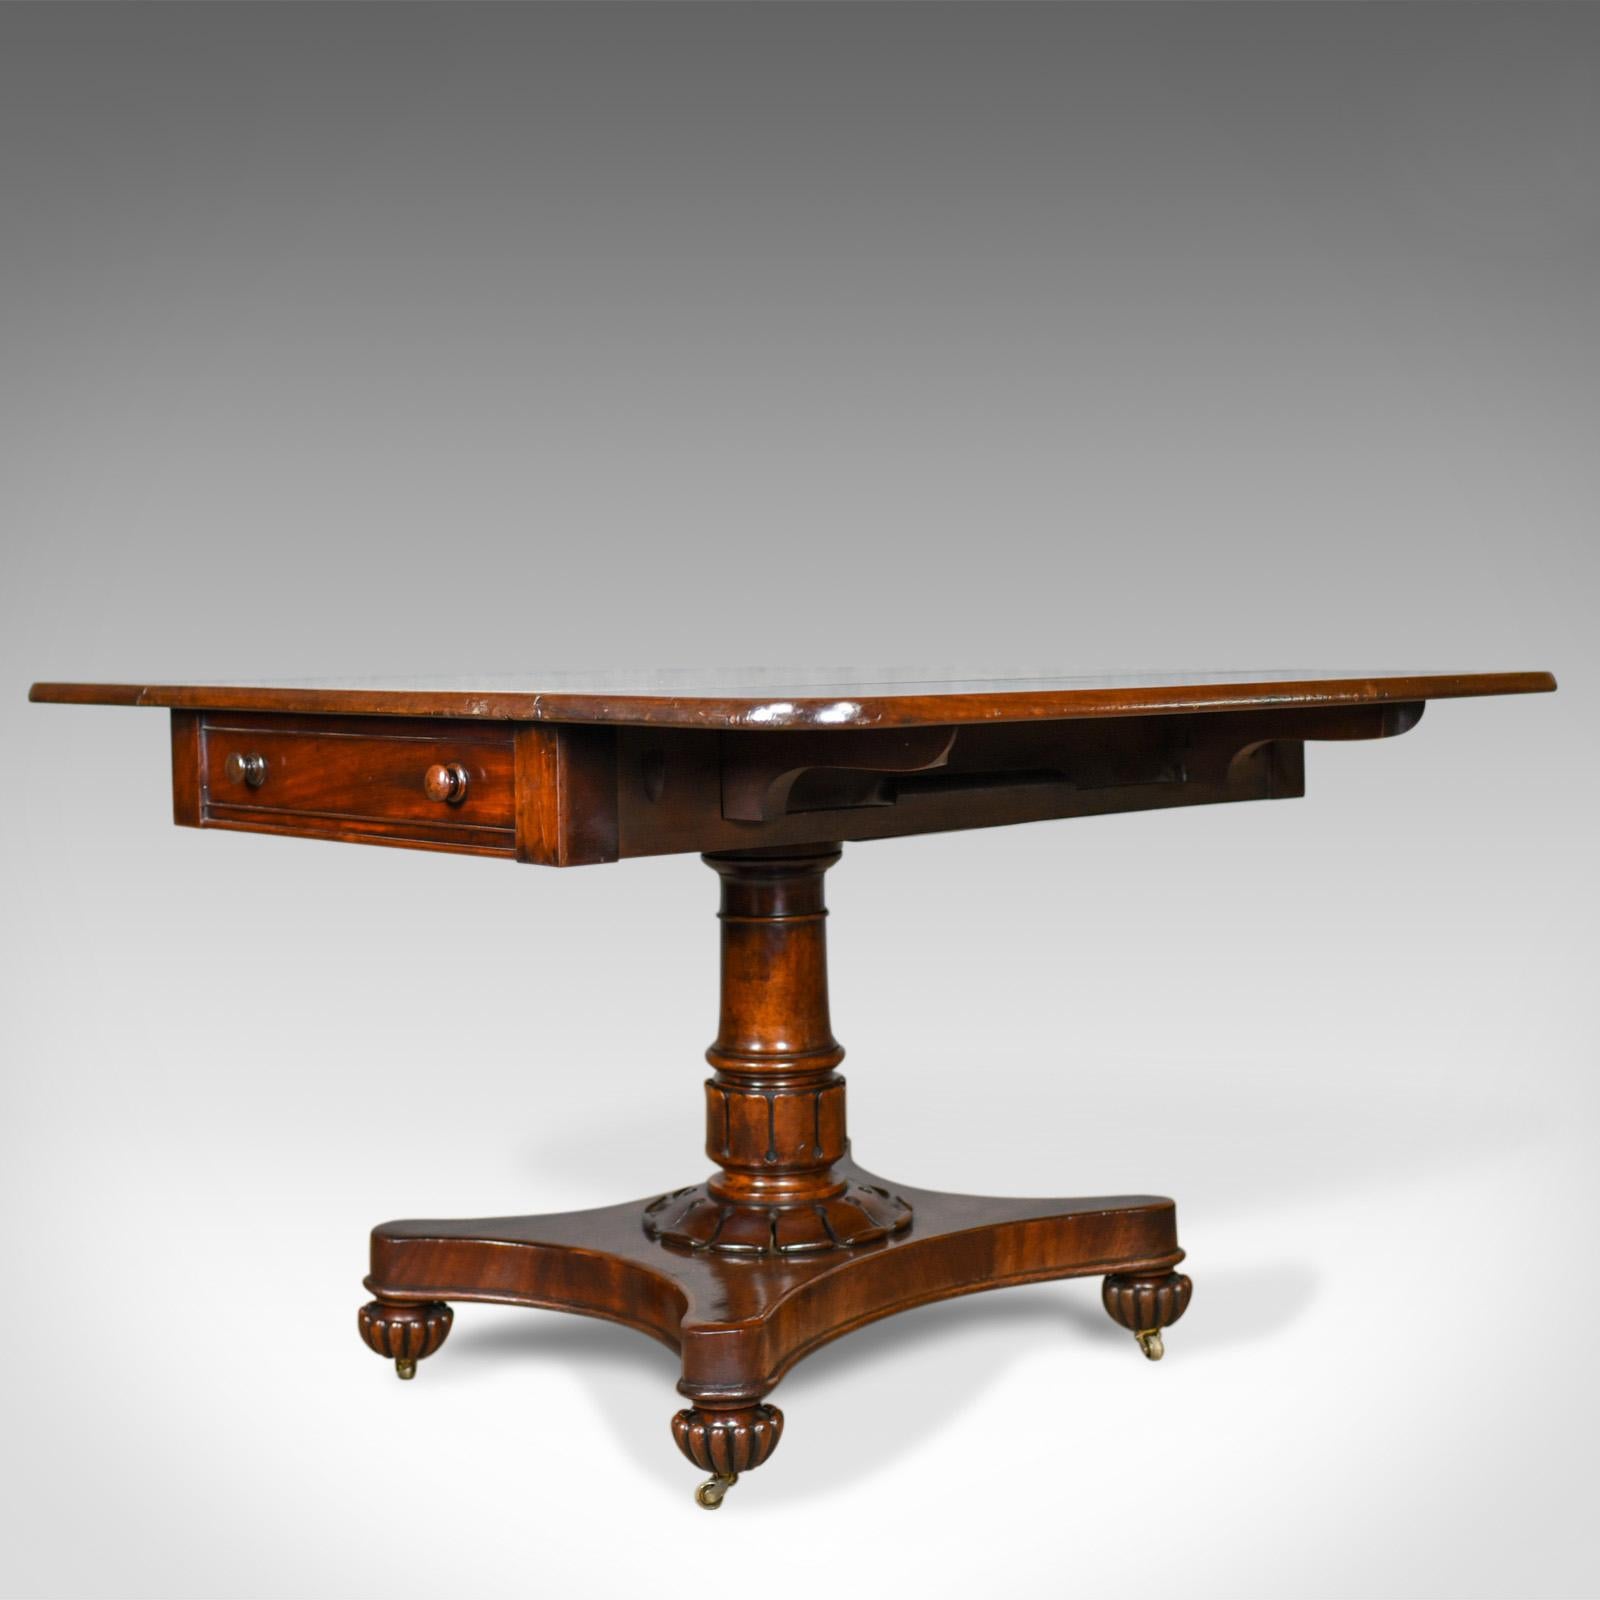 This is an antique Pembroke table, an English, William IV, mahogany sofa table dating to the early 19th century, circa 1835.

The select mahogany displays good, rich, consistent color
Grain interest with appealing tonal qualities
Desirable aged